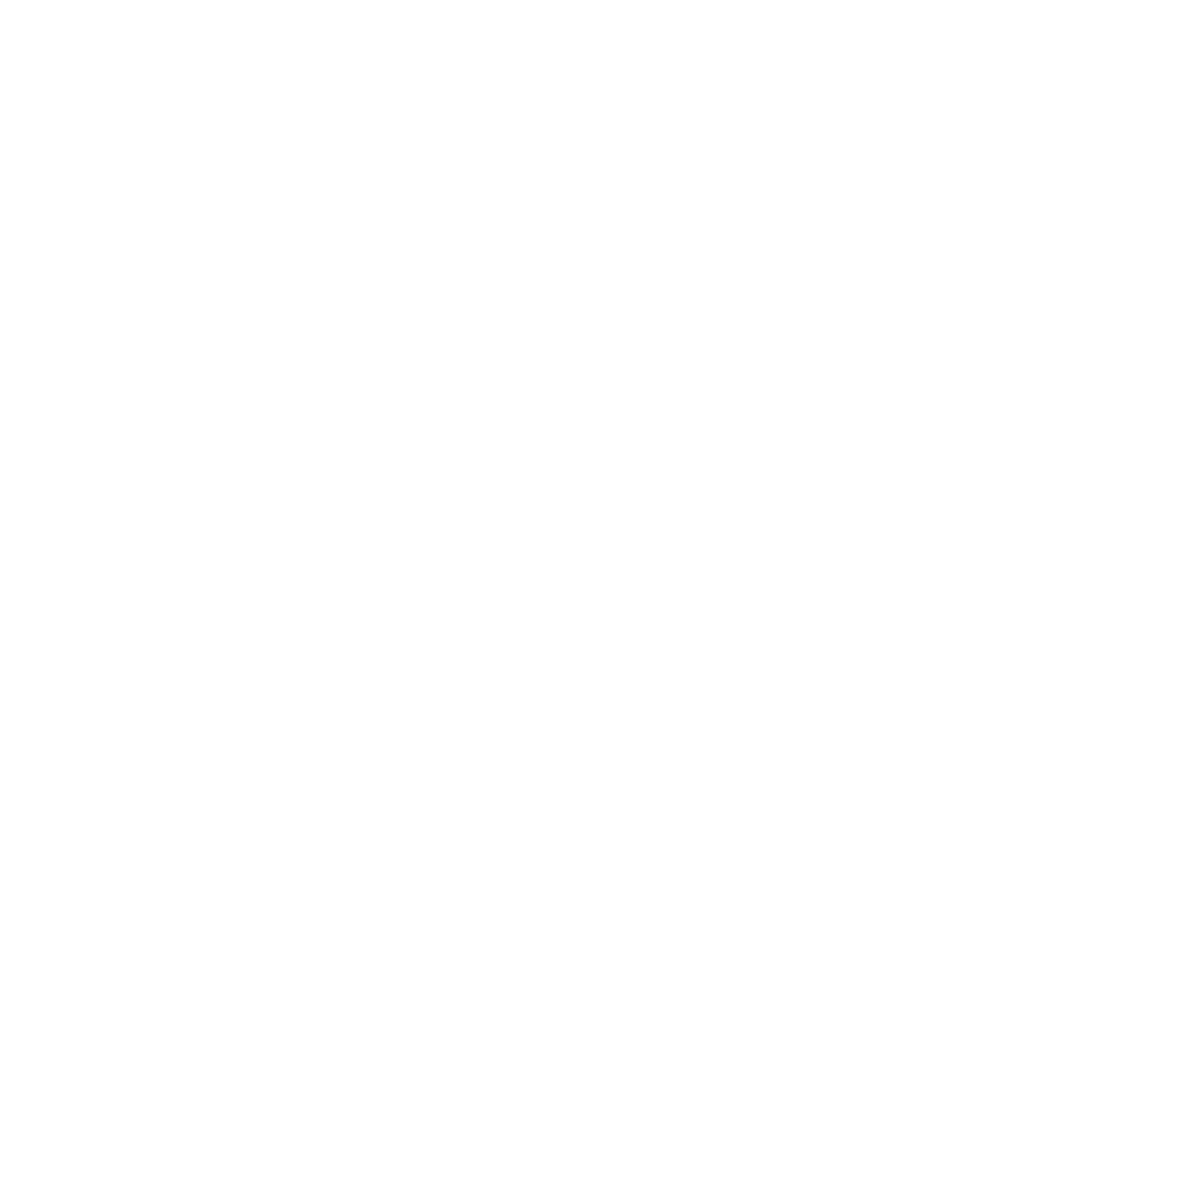 AA 4 star country house hotel logo white